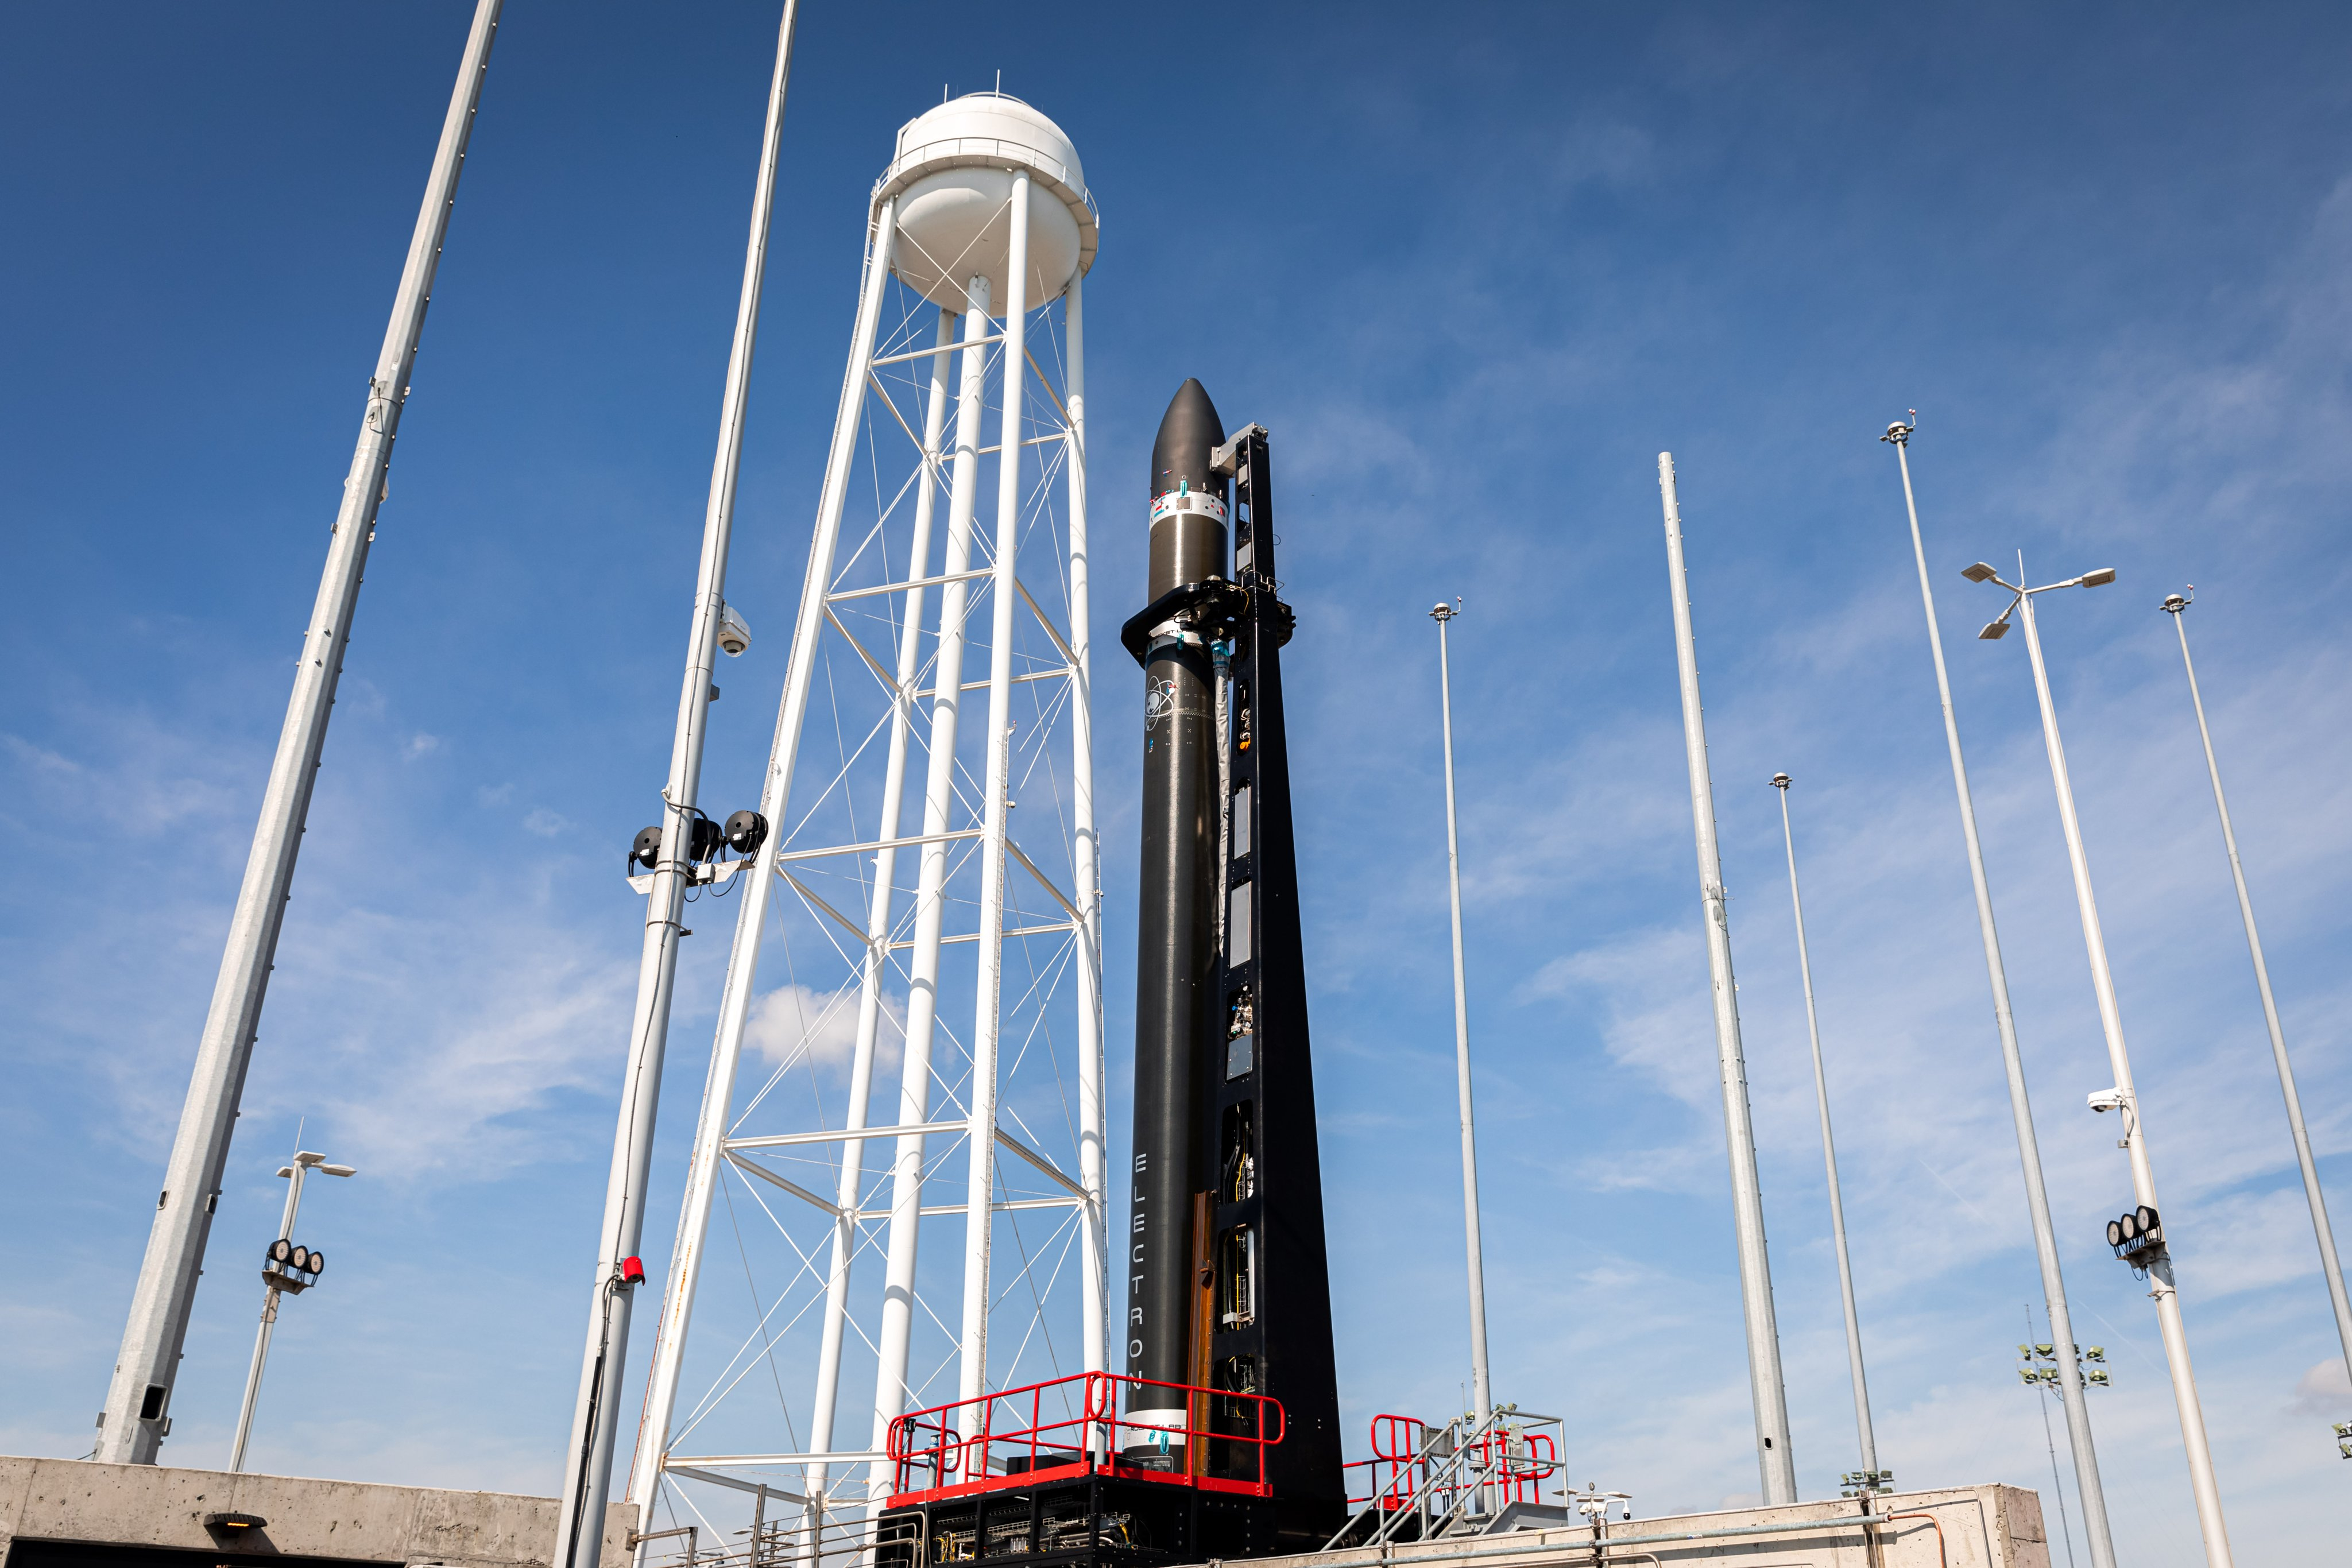 A Rocket Lab Electron rocket on its Virginia launch pad with a blue sky.